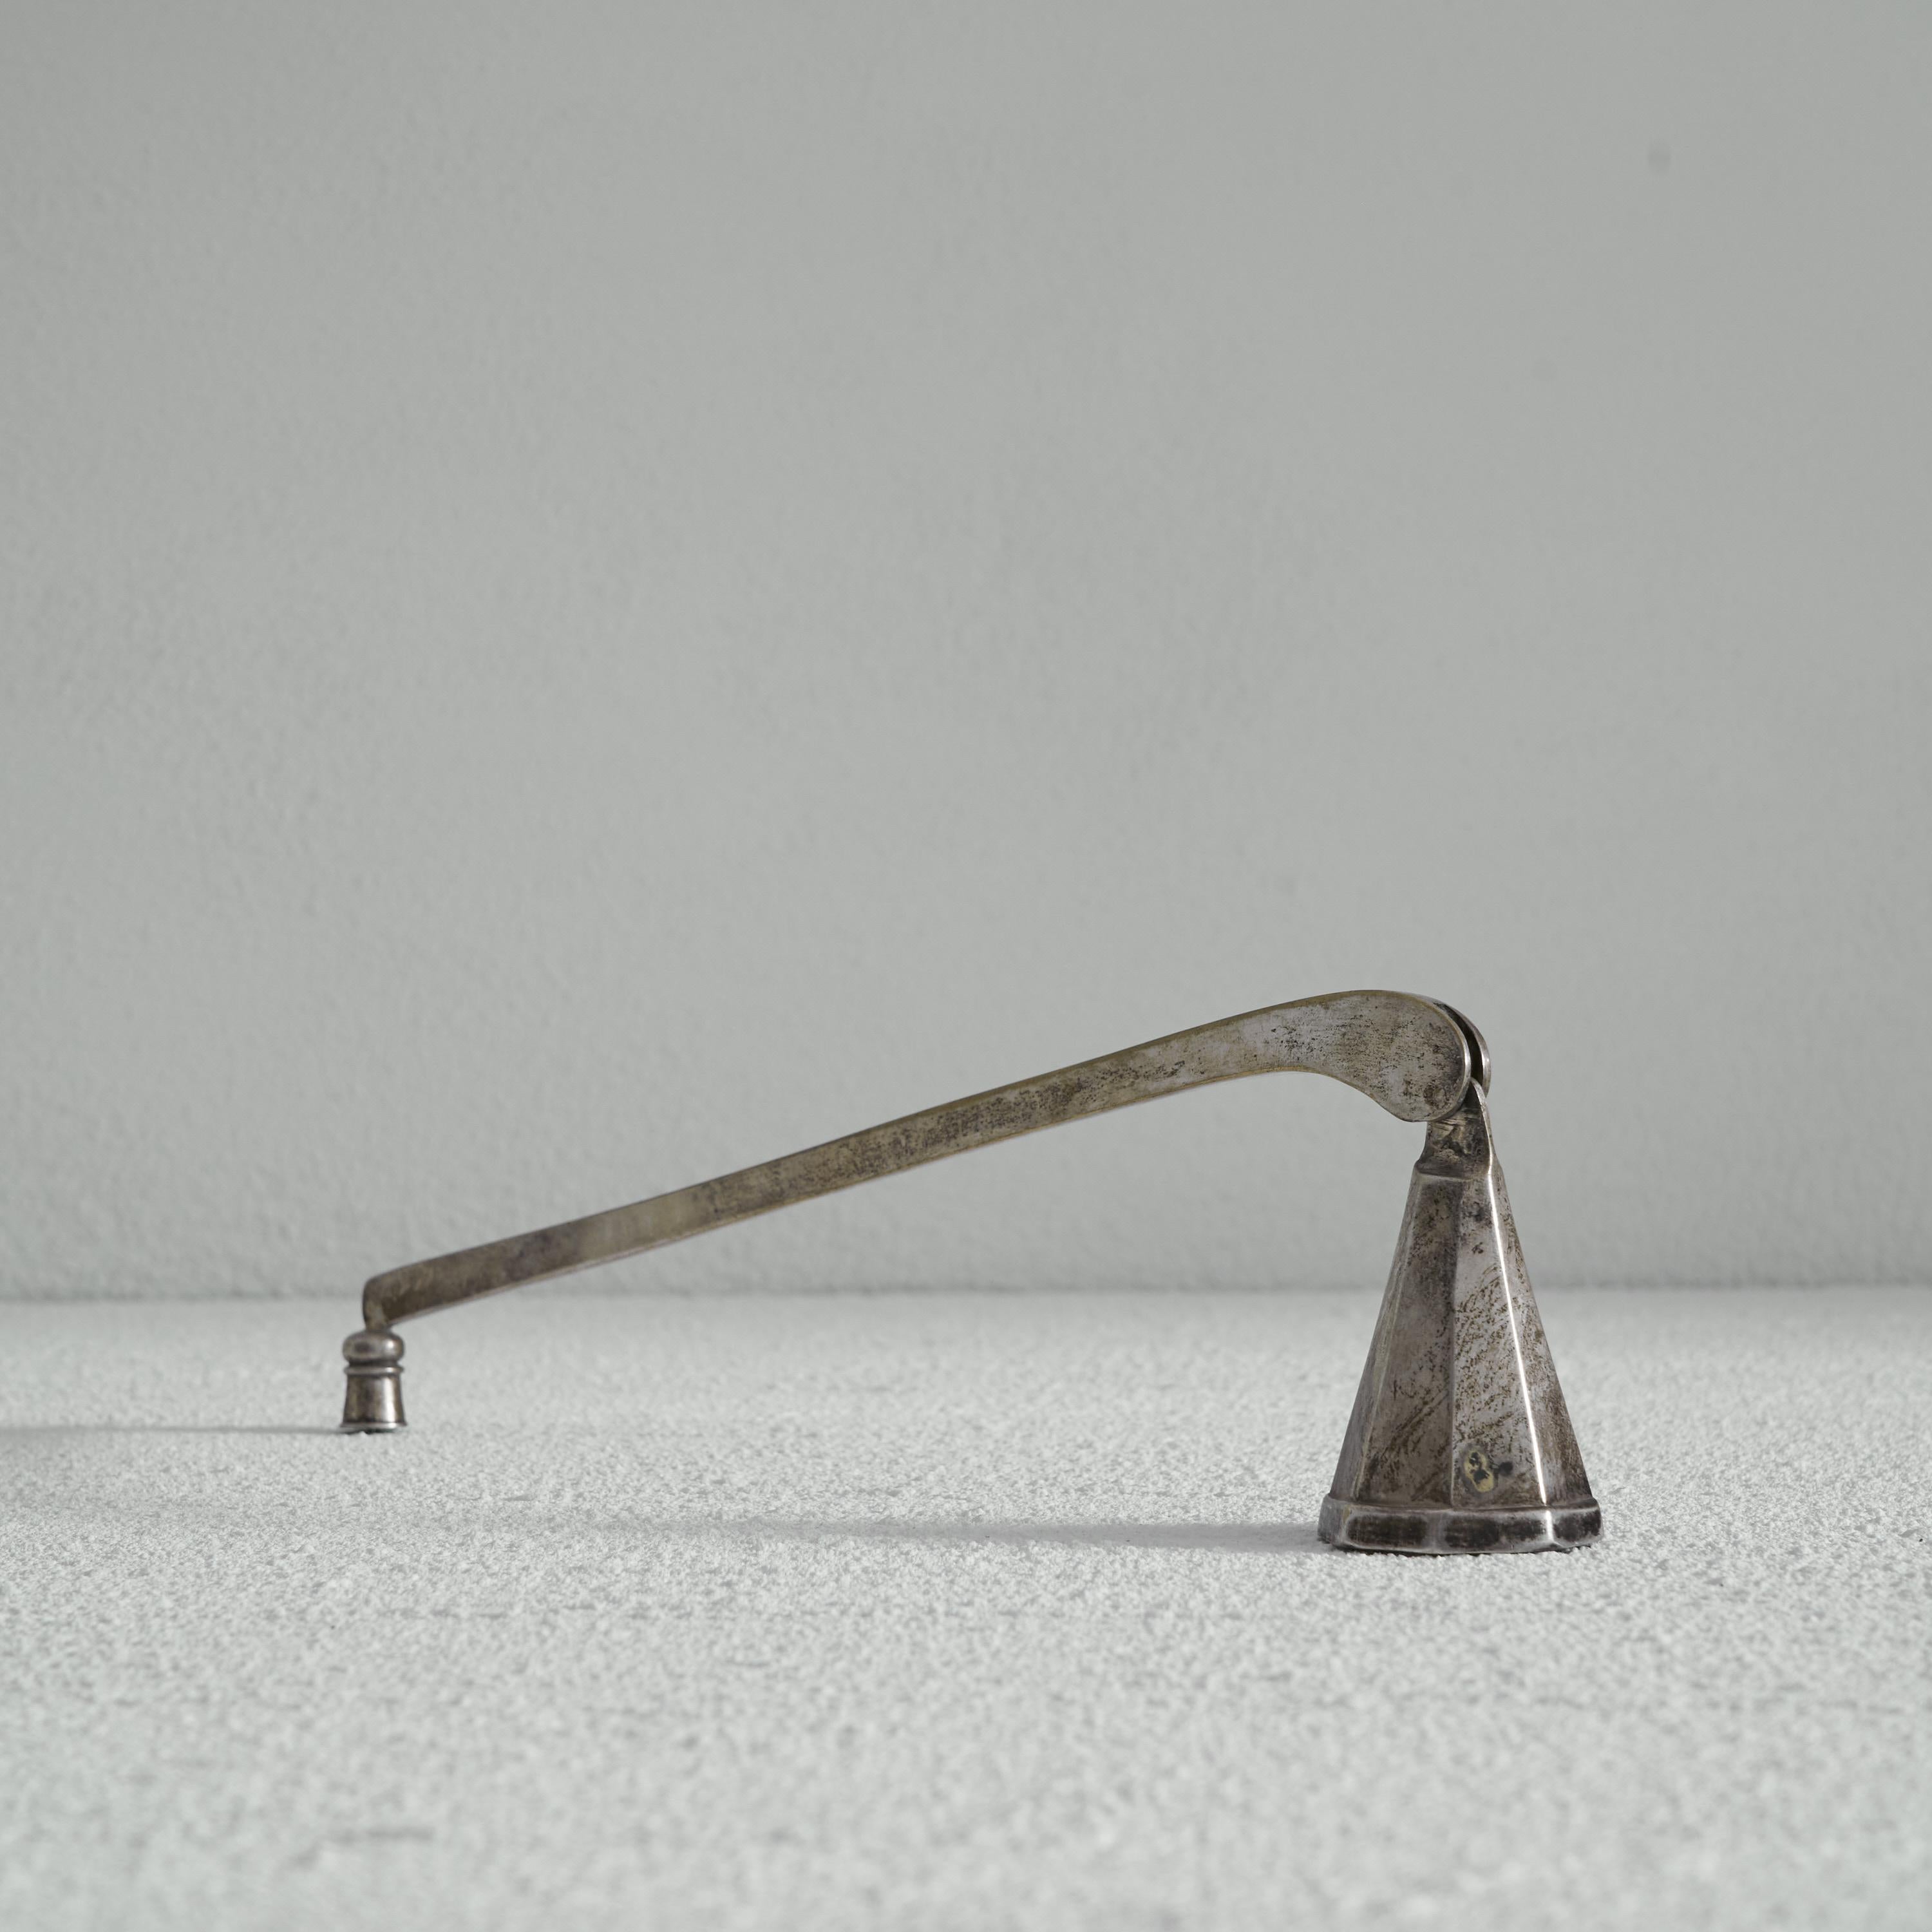 1840 candle snuffer